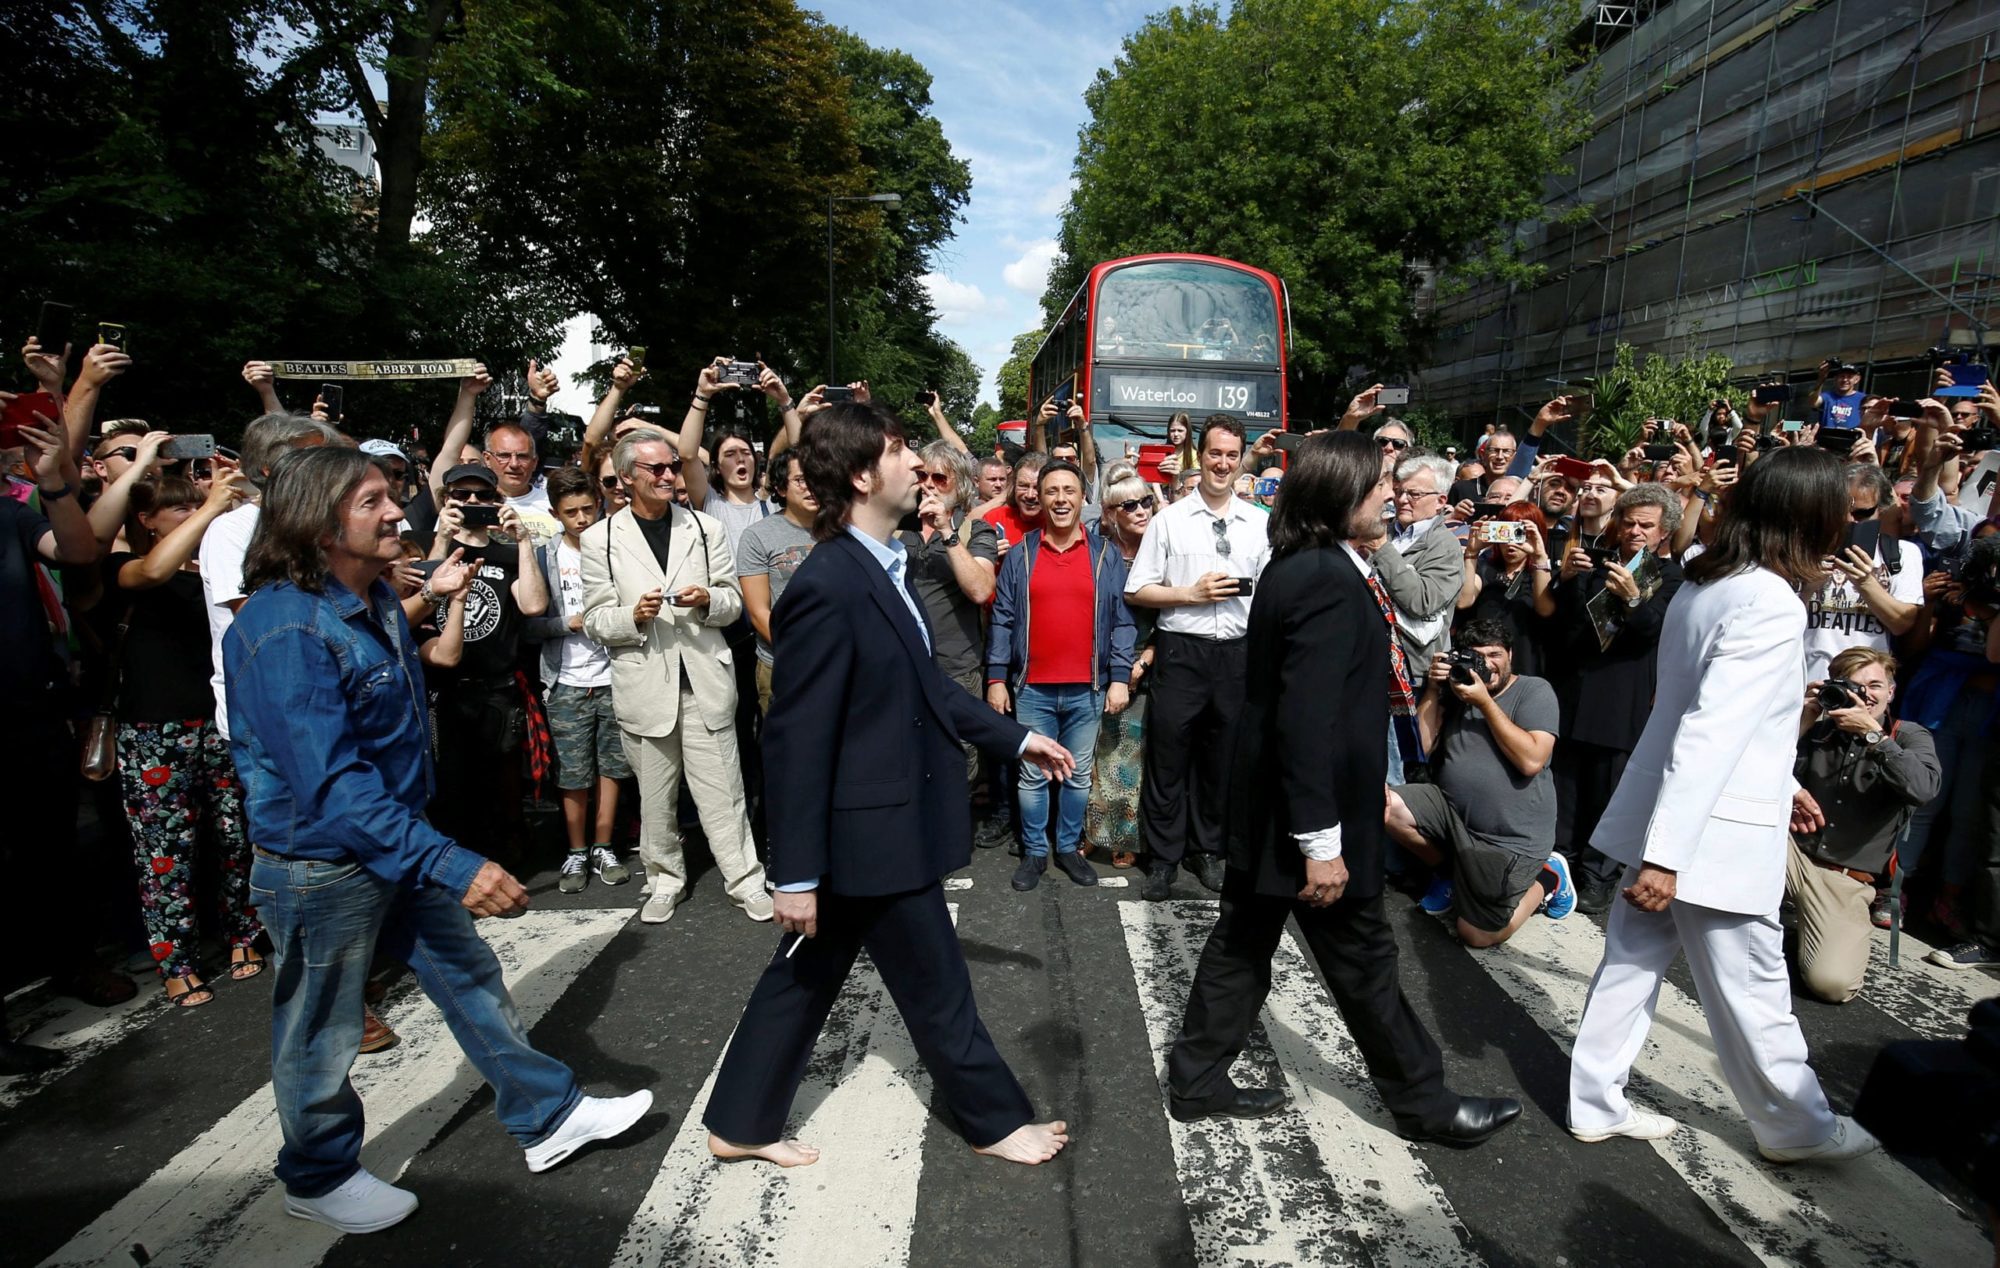 People take pictures as the Beatles cover band members walk on the zebra crossing on Abbey Road in London, Britain August 8, 2019. REUTERS/Henry Nicholls